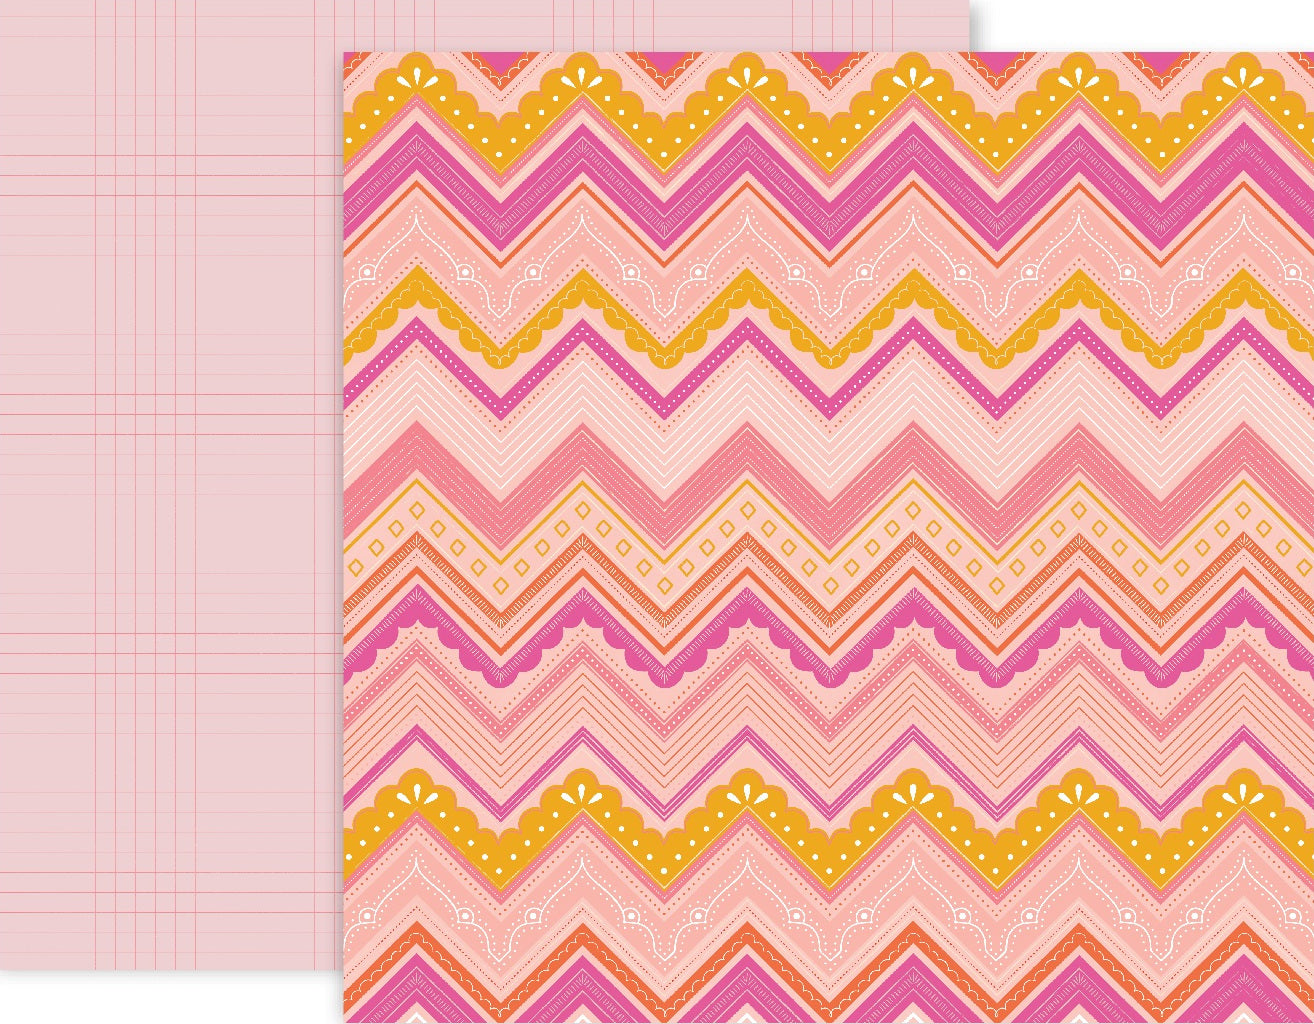 Truly Grateful Paper 6 - Pink Paislee double-sided patterned paper with fancy pink chevron pattern and graph reverse